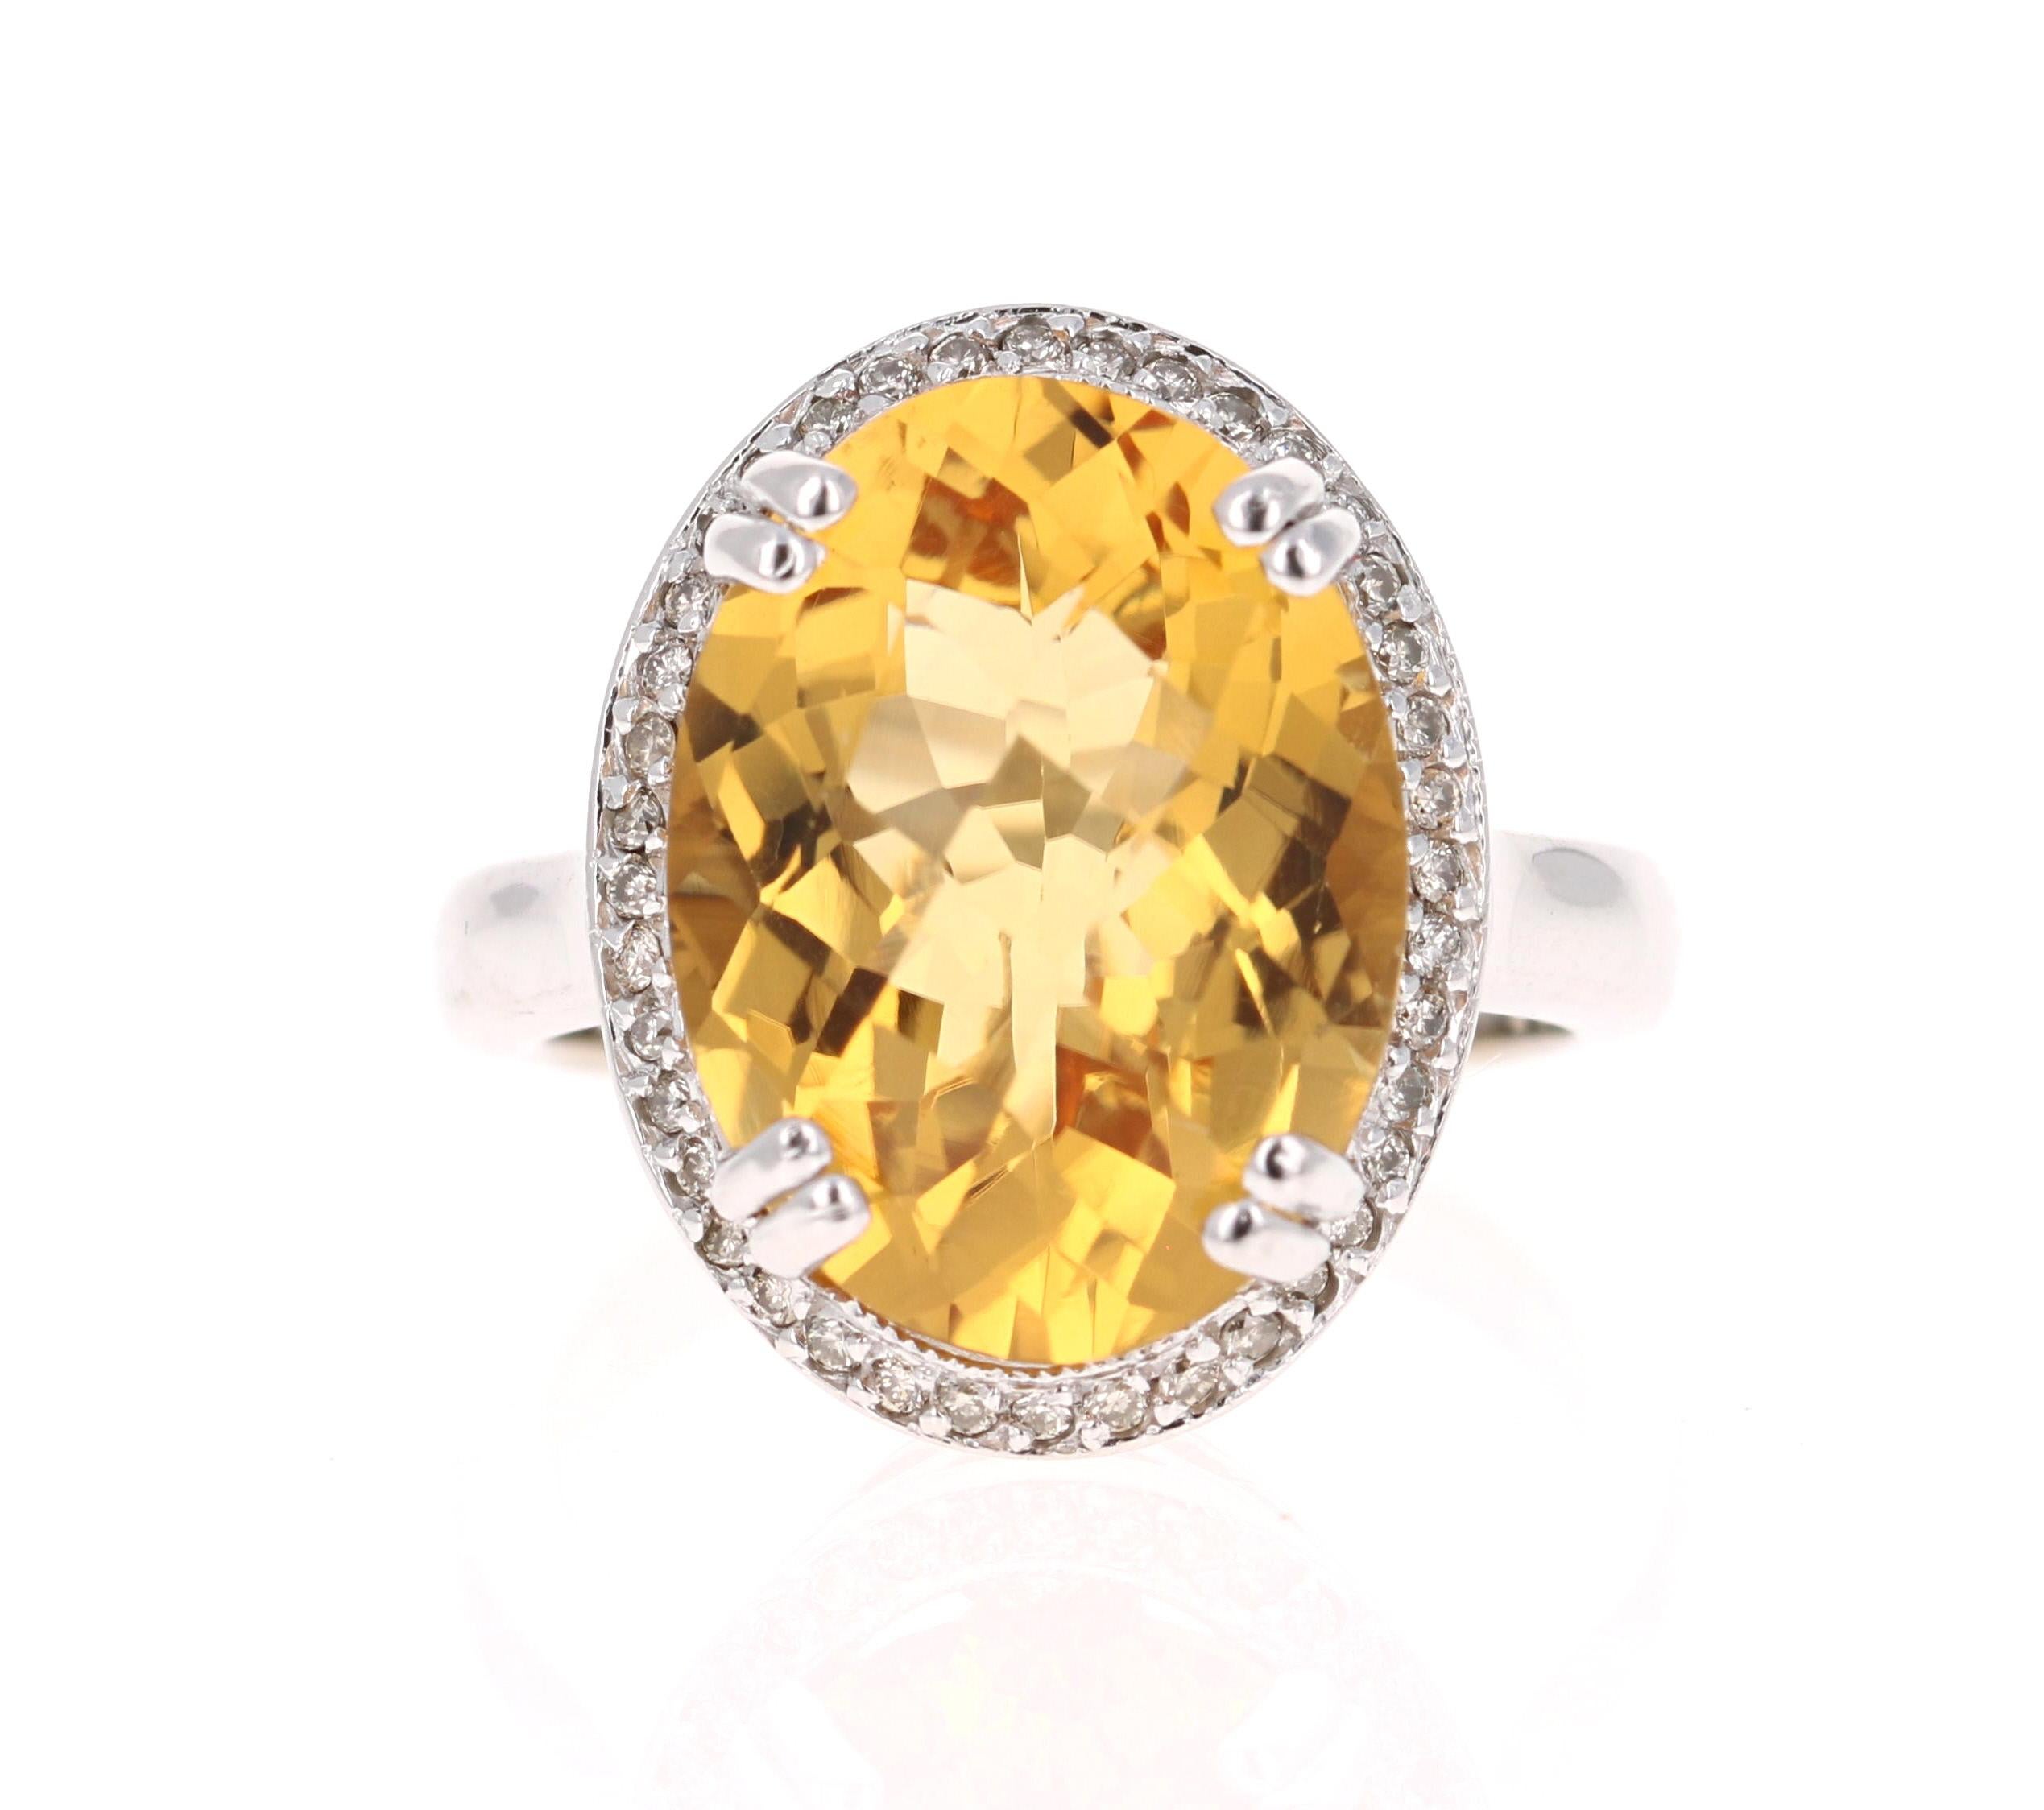 This beautiful ring has a bright and large Citrine that weighs 8.07 Carats. It is surrounded by a Halo of 40 Round Cut Diamonds that weigh 0.80 carats (Clarity: VS, Color: H). The total carat weight of the ring is 8.27 Carats. 

The Oval cut Citrine